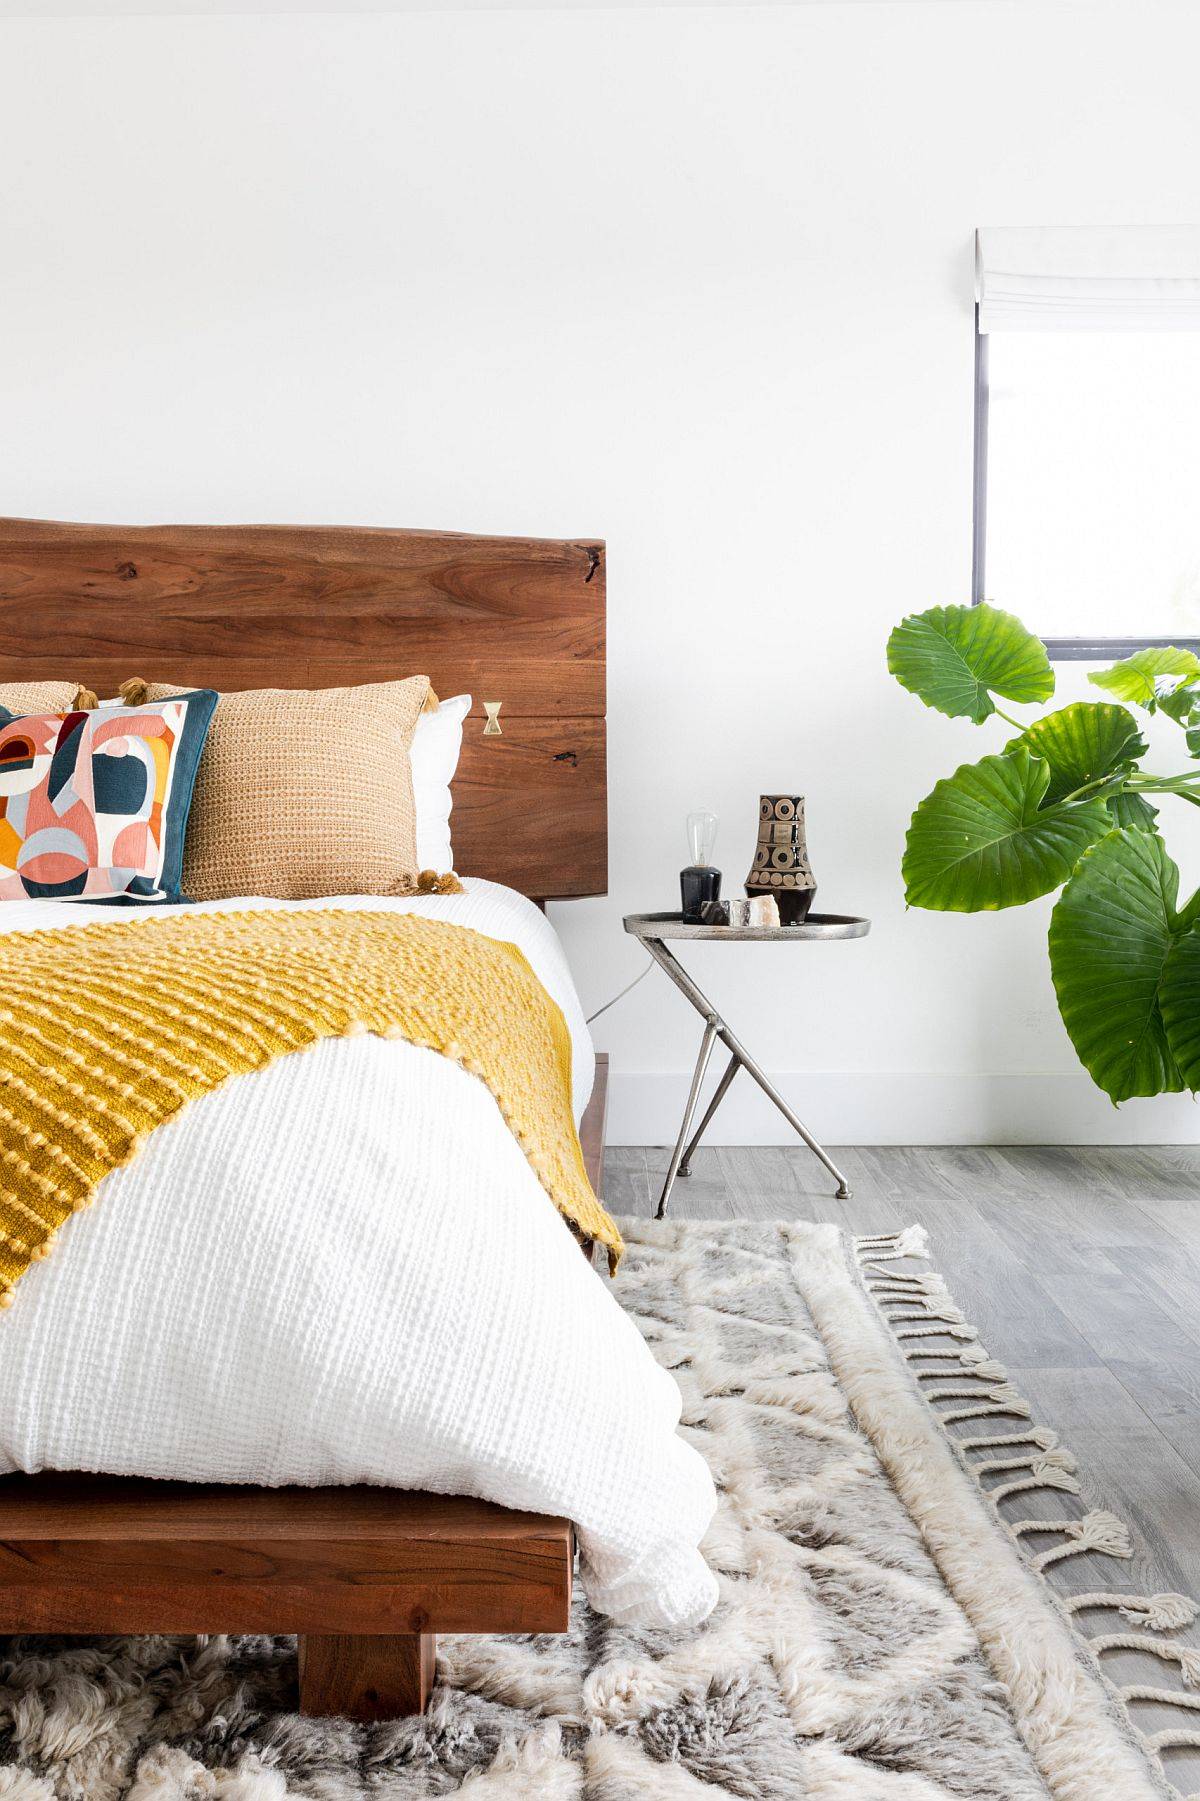 Wood-and-white-look-in-the-bedroom-is-a-showstopper-even-in-the-eclectic-bedroom-58241